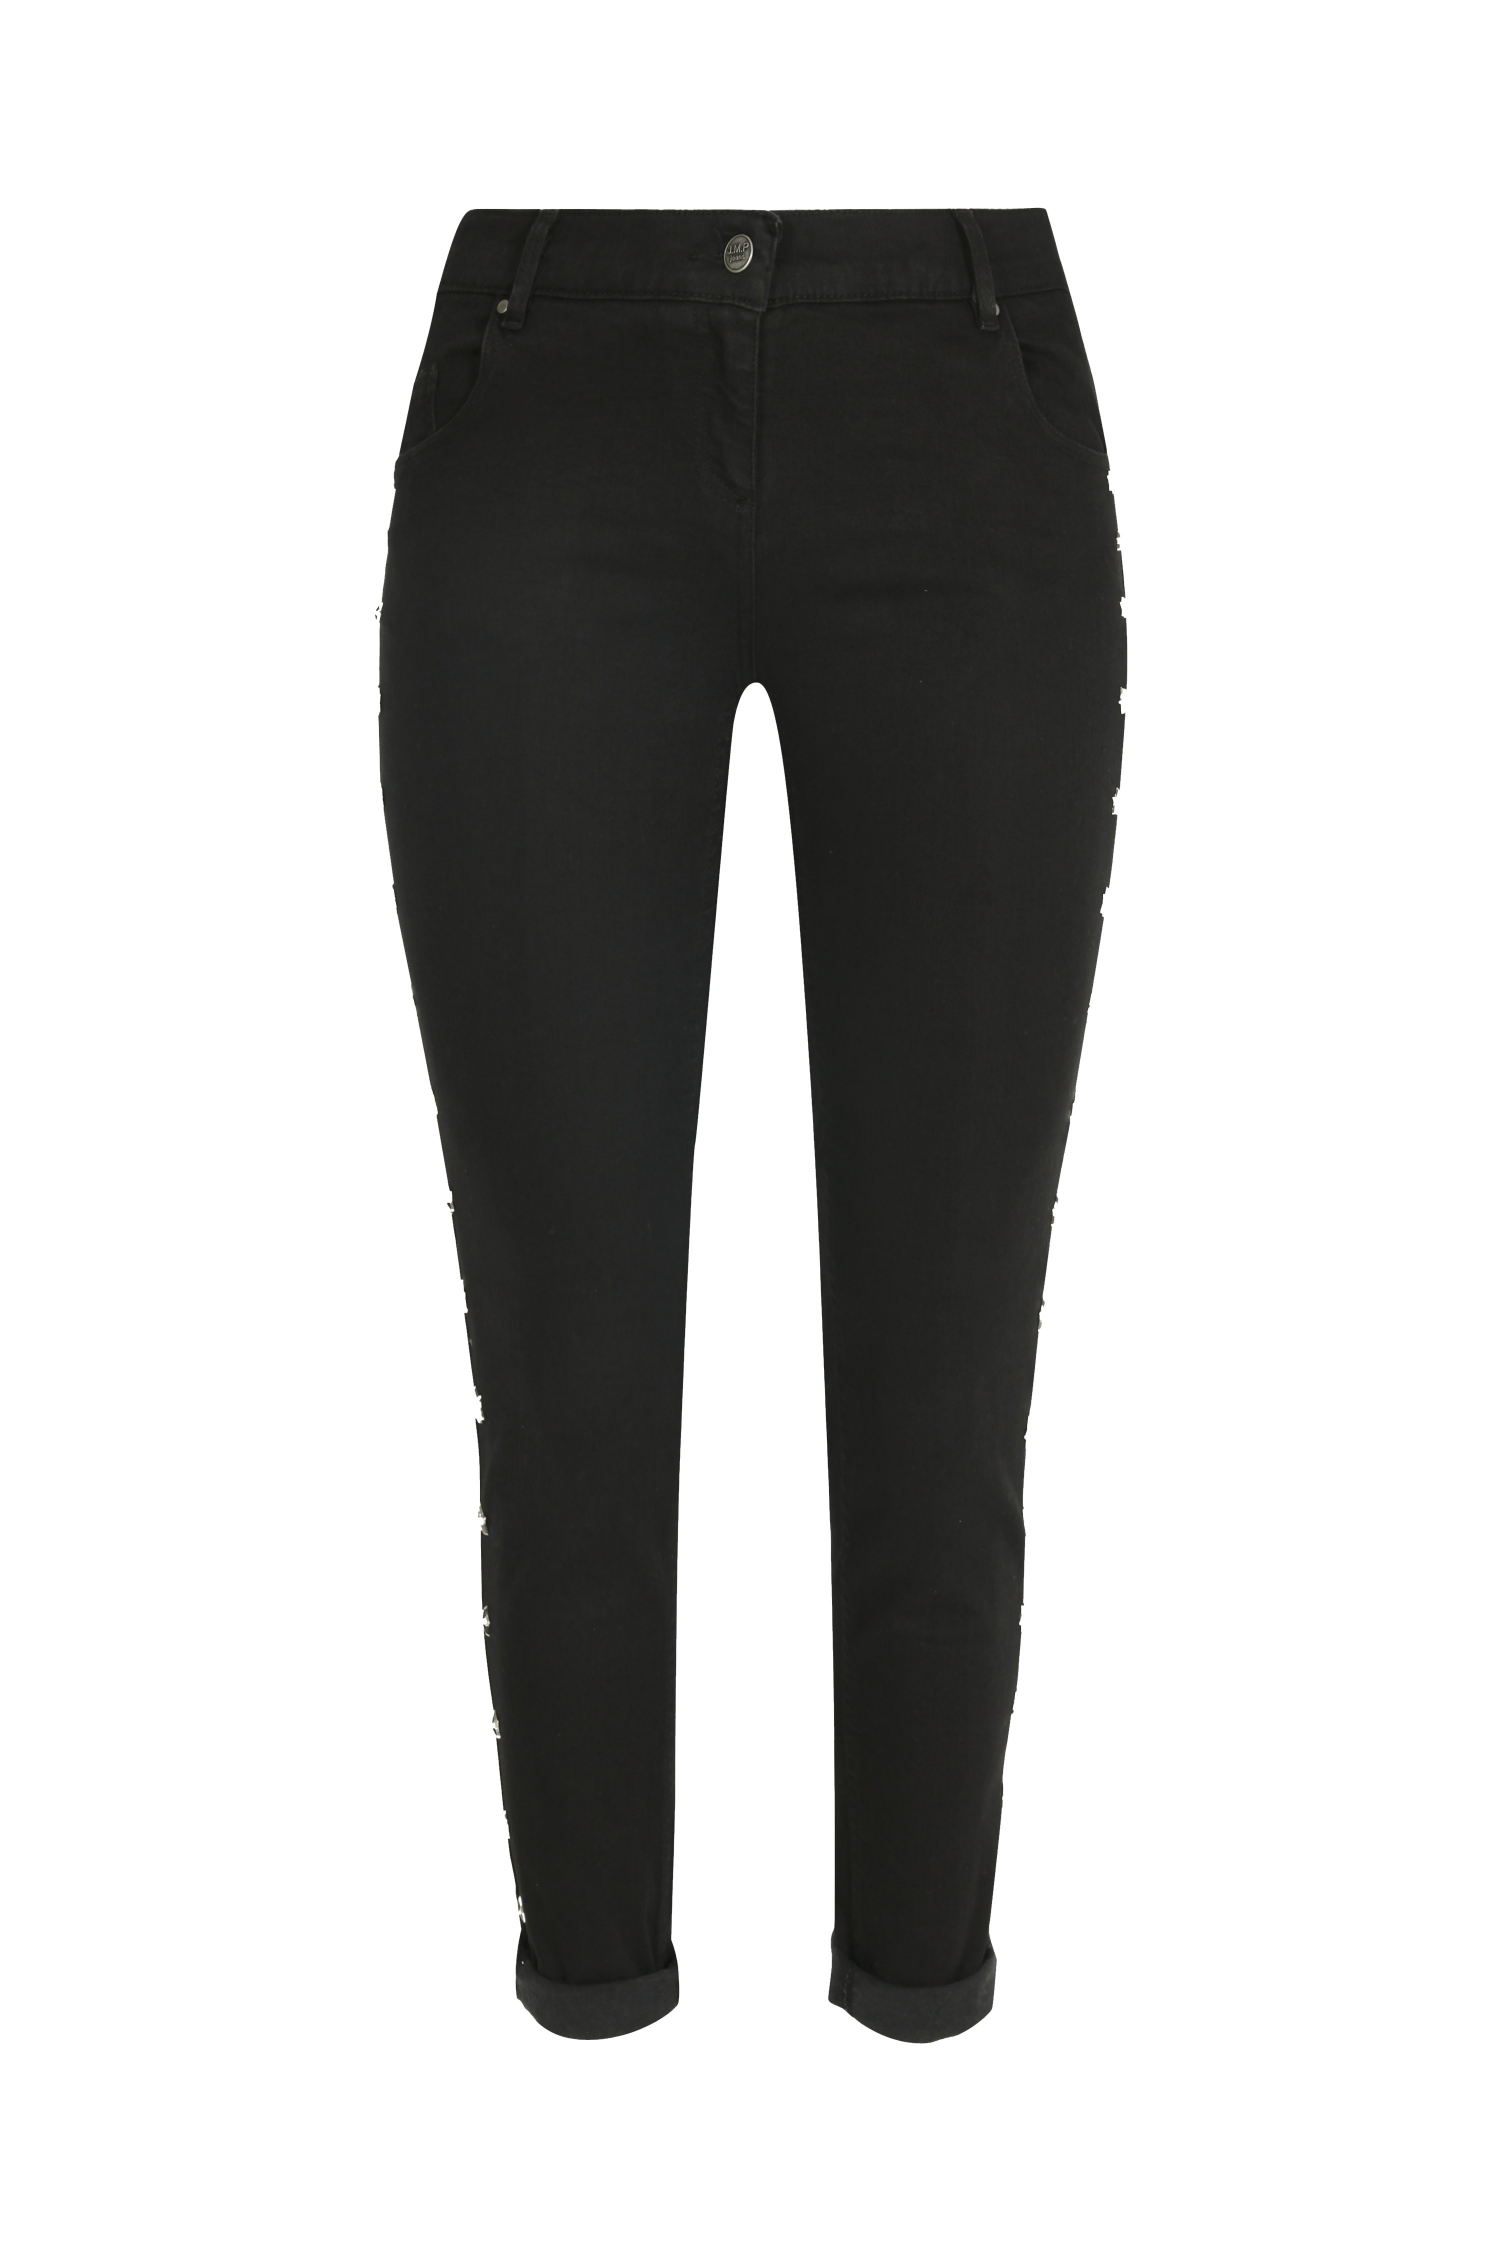 Black jeans with star-shaped studs